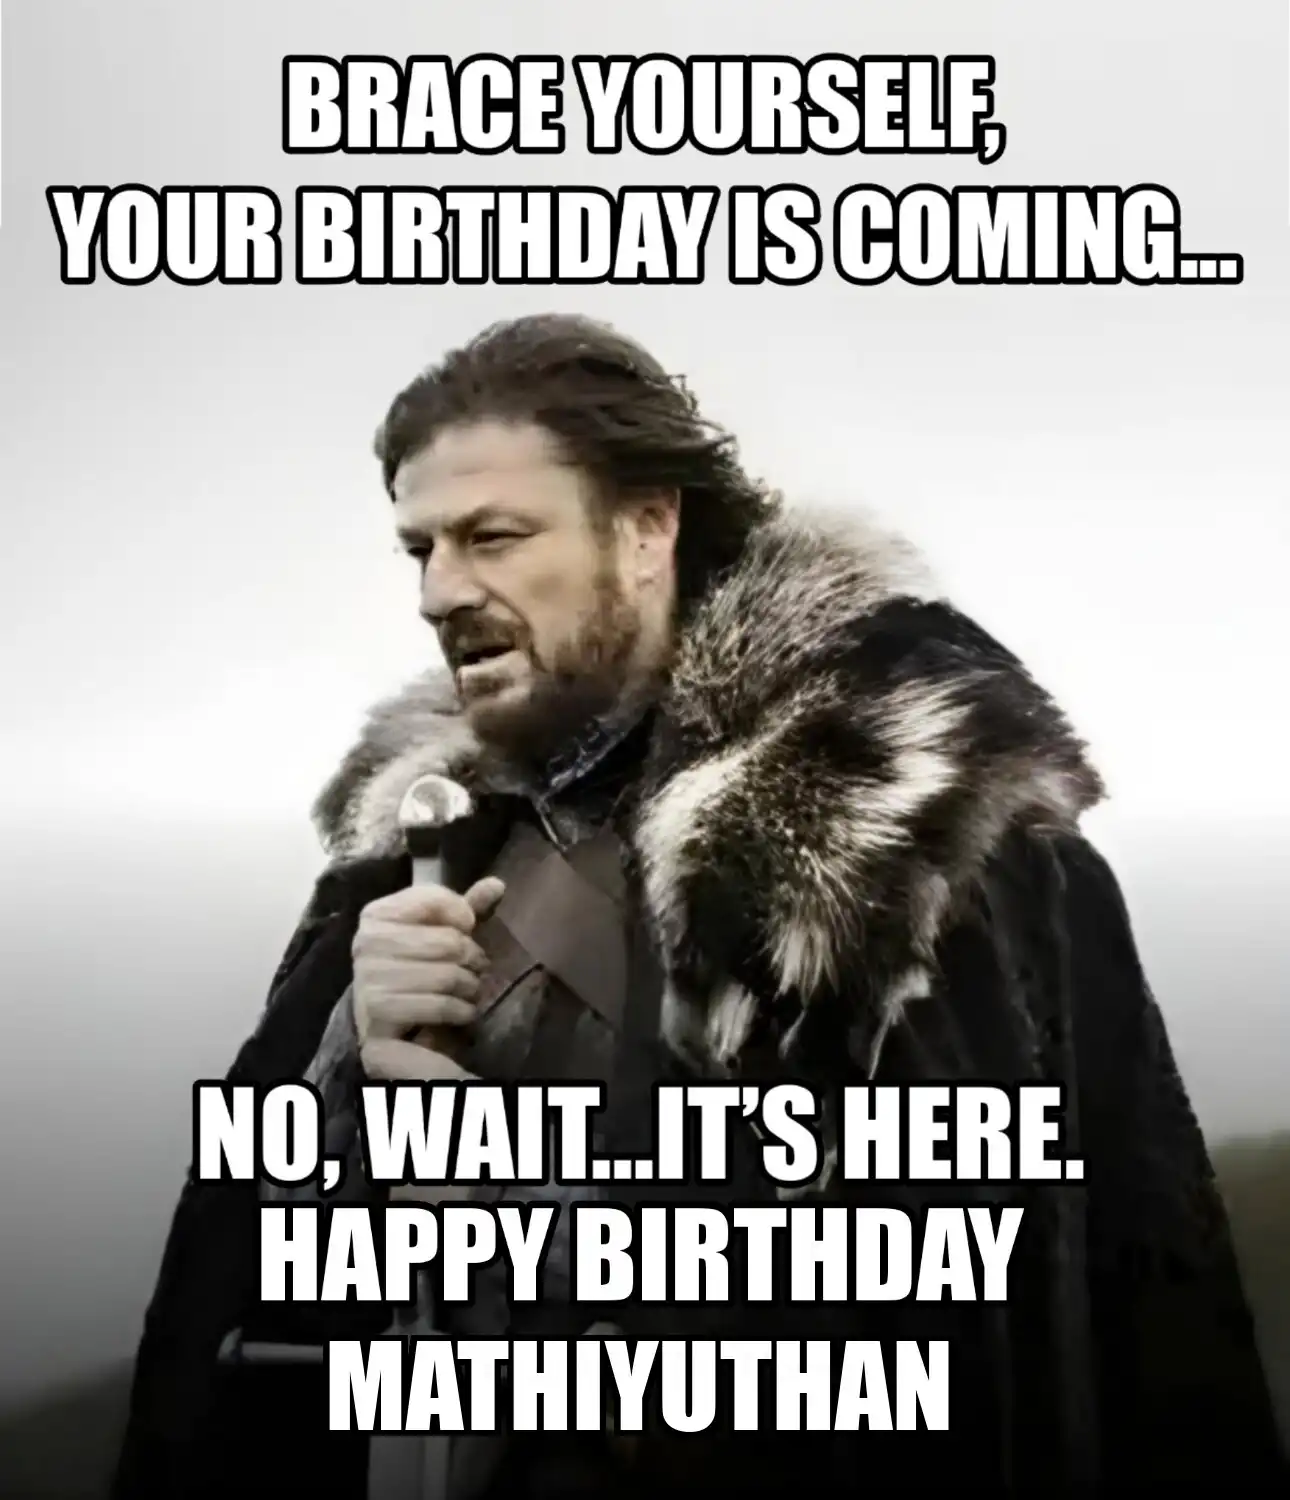 Happy Birthday Mathiyuthan Brace Yourself Your Birthday Is Coming Meme